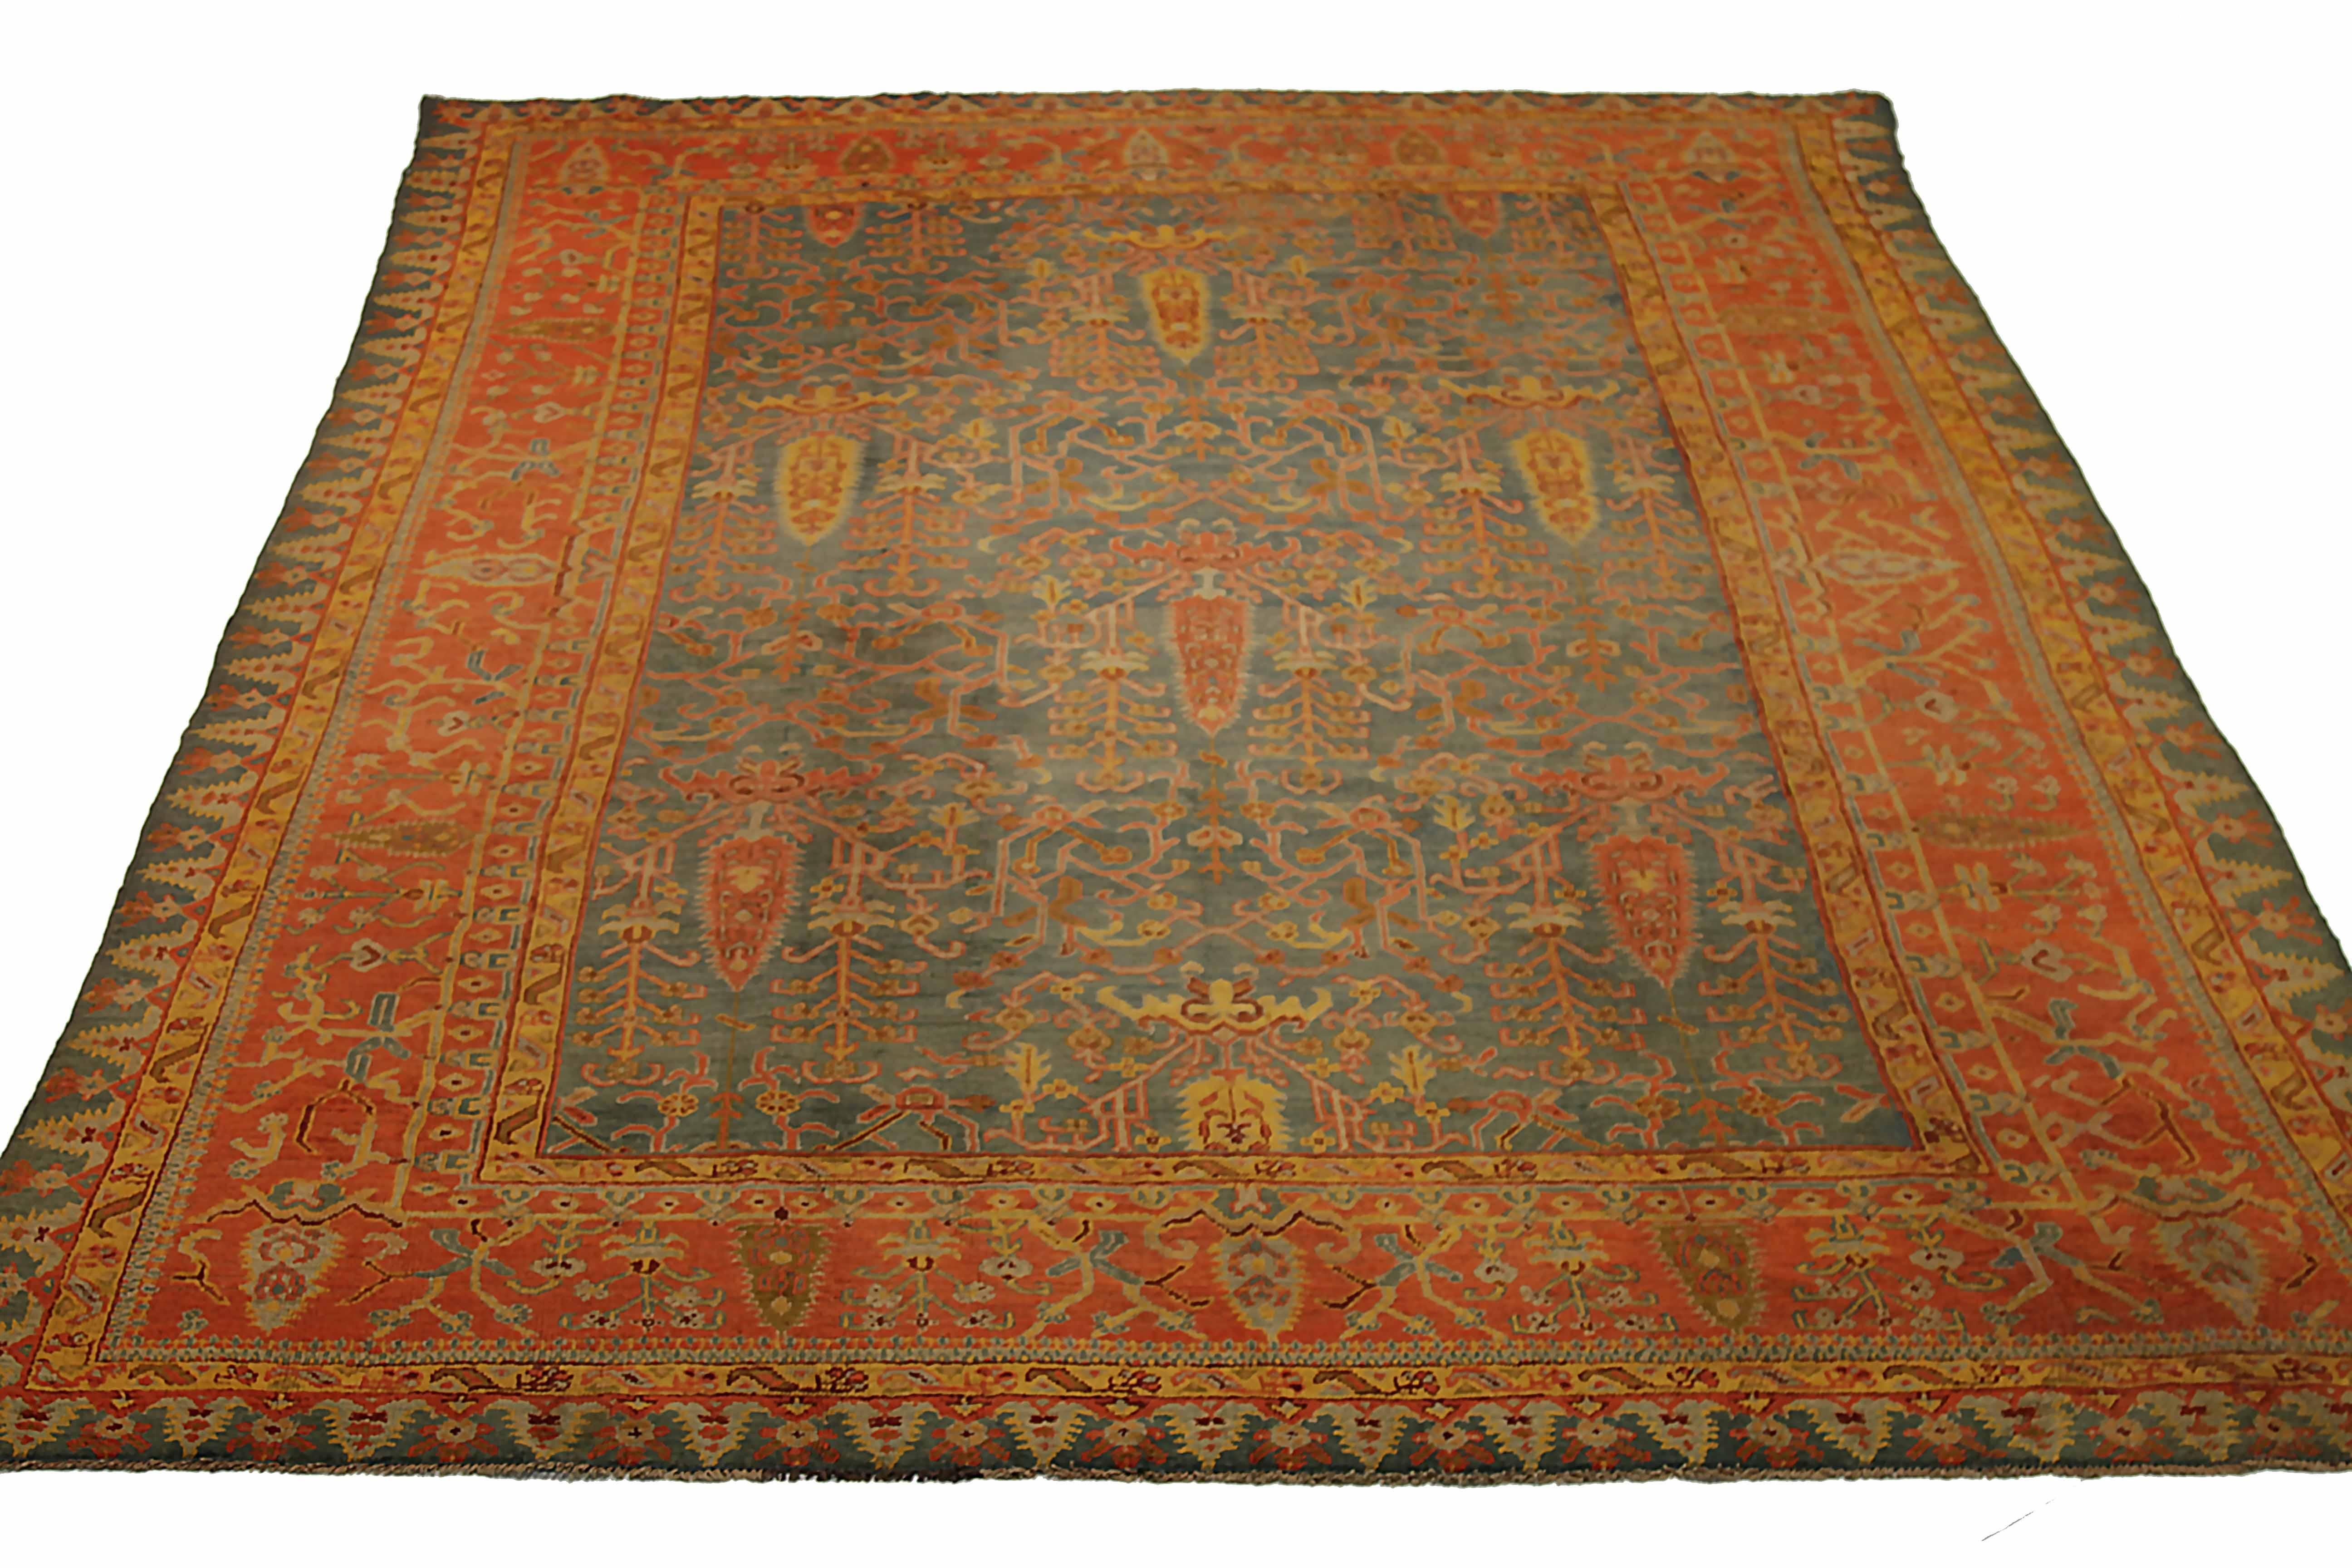 Antique area rug handwoven from the finest sheep’s wool. It’s colored with all-natural vegetable dyes that are safe for humans and pets. It’s a traditional Oushak design handwoven by expert artisans. It’s a lovely area rug that can be incorporated